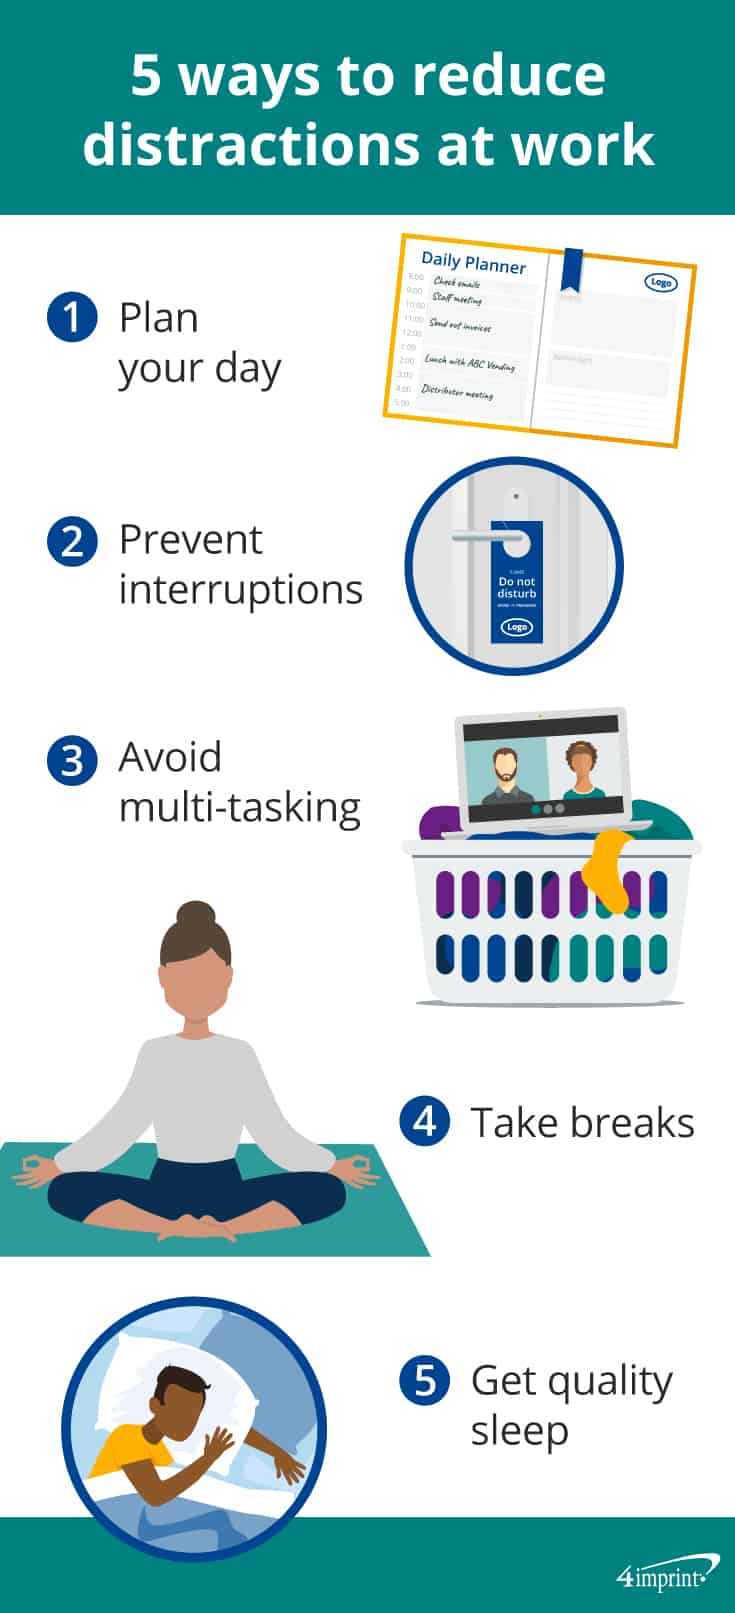 5 ways to reduce distractions at work